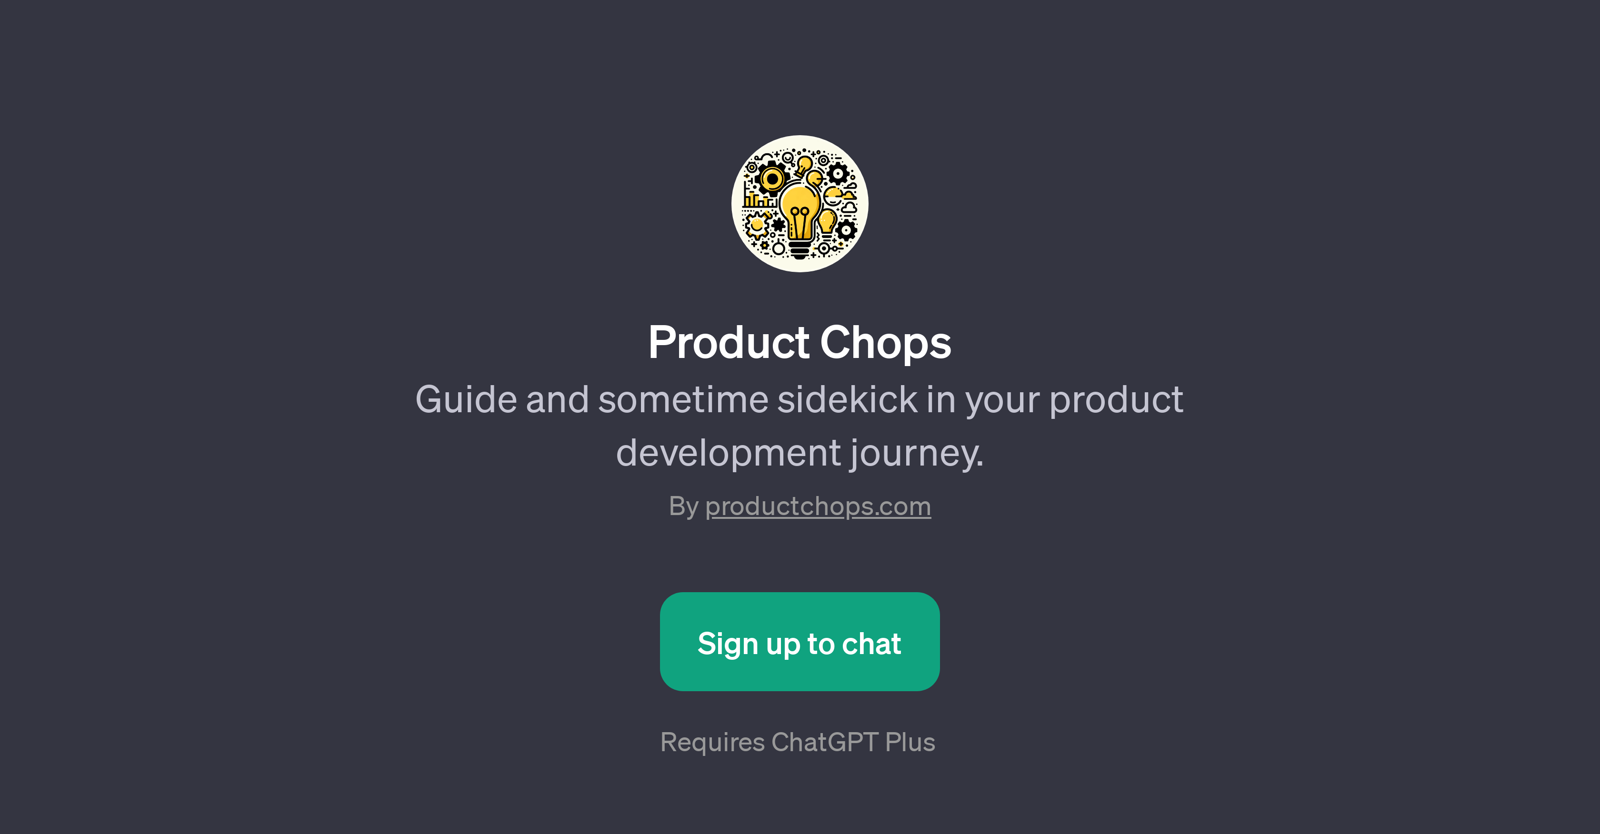 Product Chops website